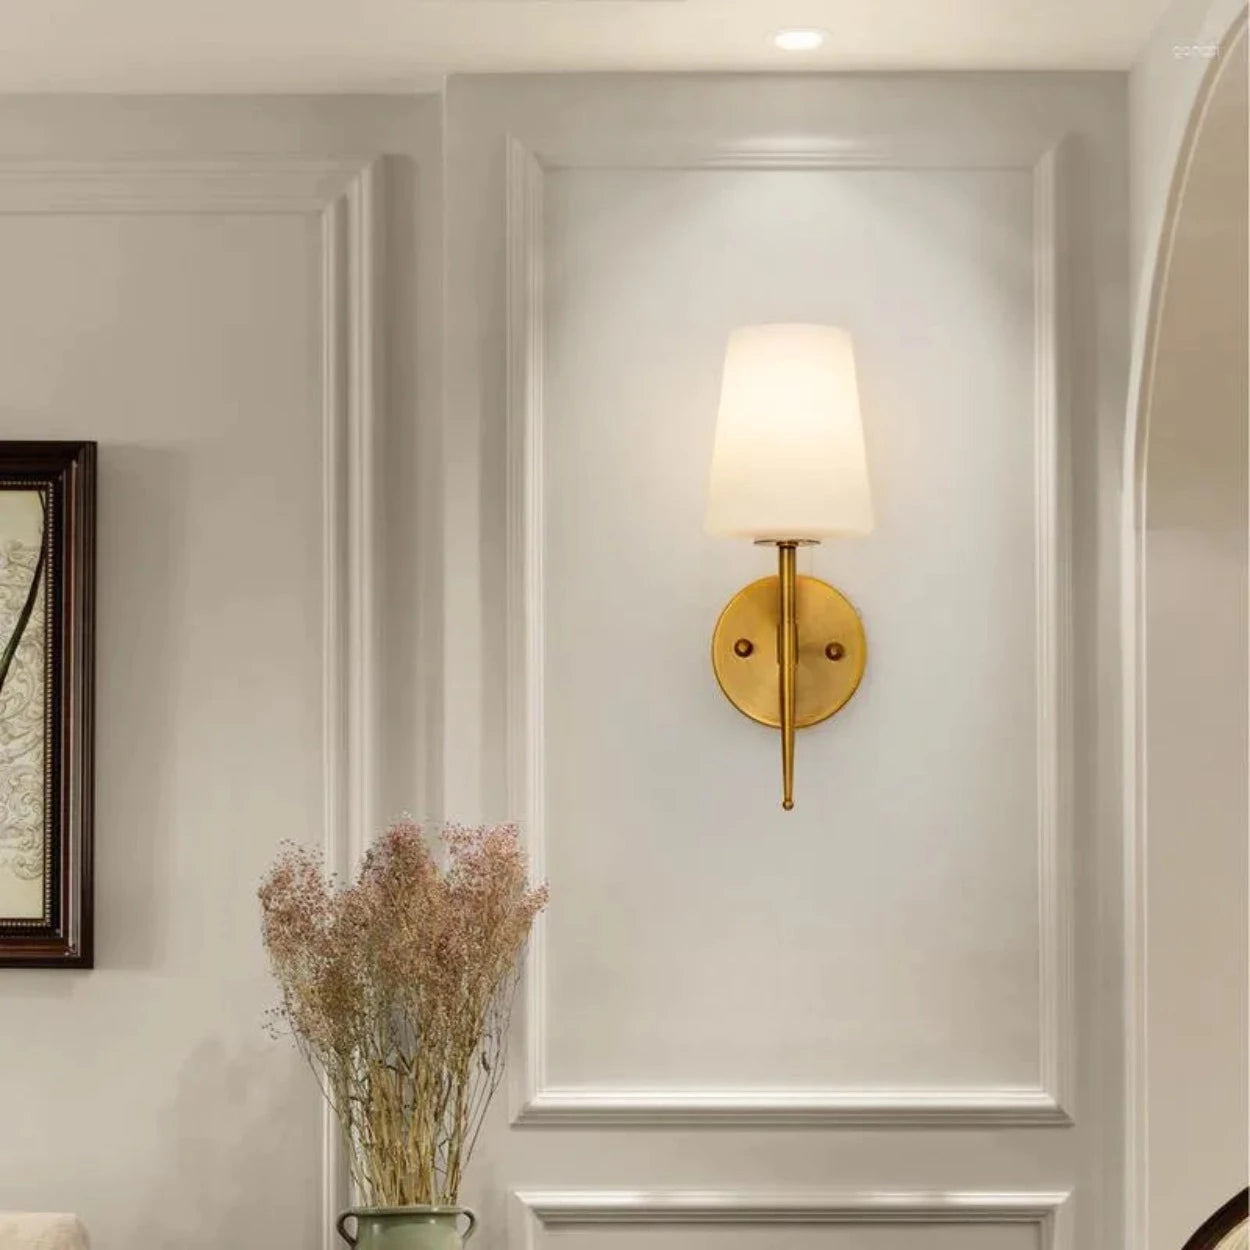 ANKUR GRACE ELEGANT WHITE GLASS AND METAL WALL LIGHT SINGLE AND DOUBLE LAMP OPTIONS